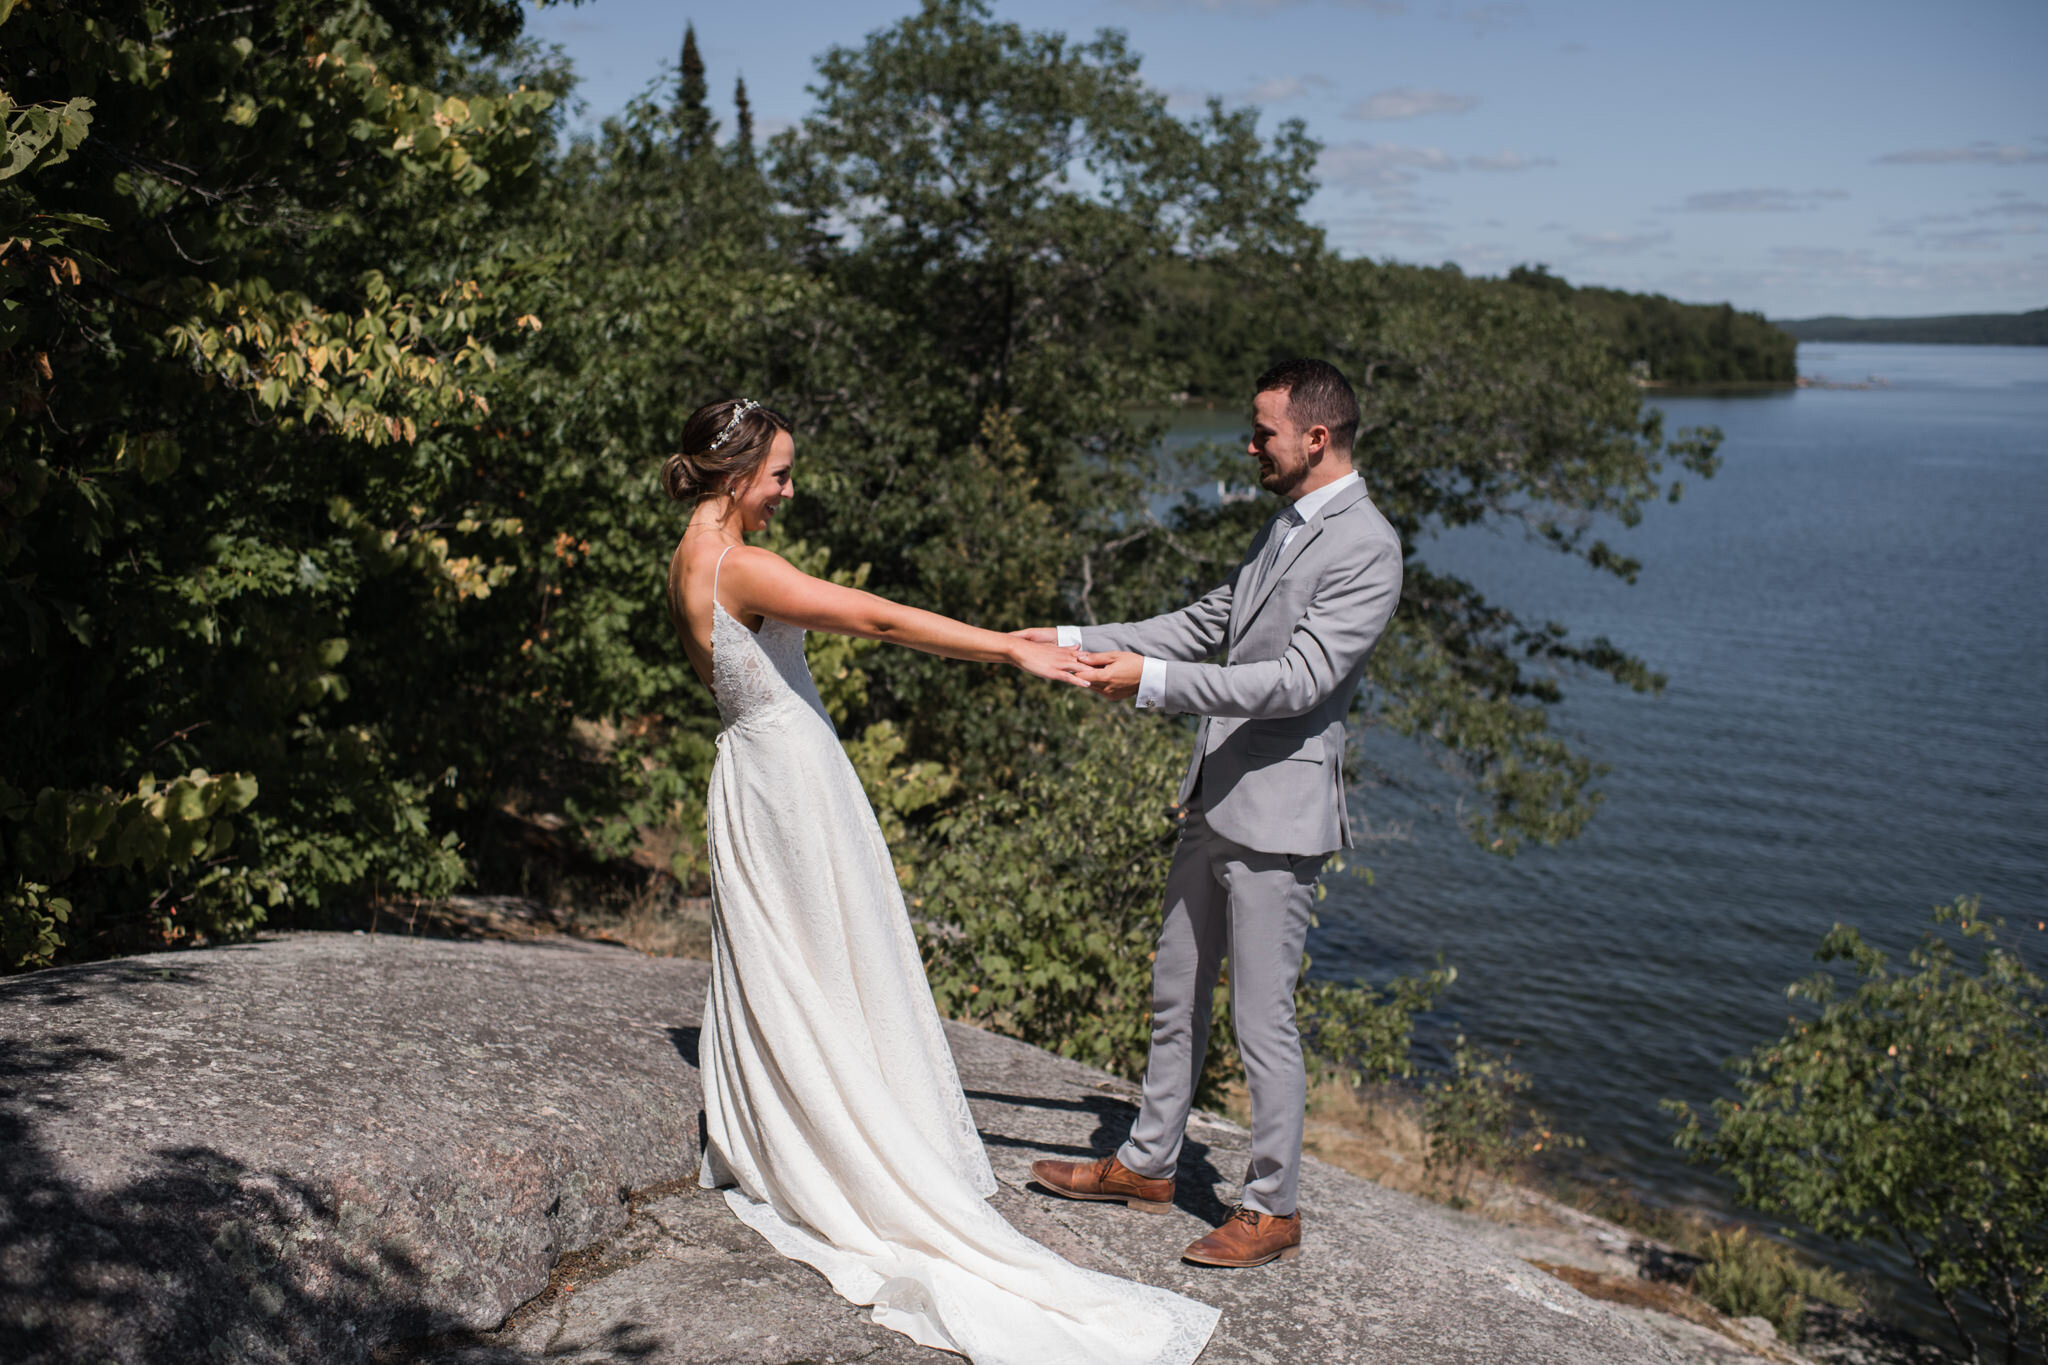 640-first-look-romantic-by-lake-ontario-outdoors-cottage-wedding-photos.jpg